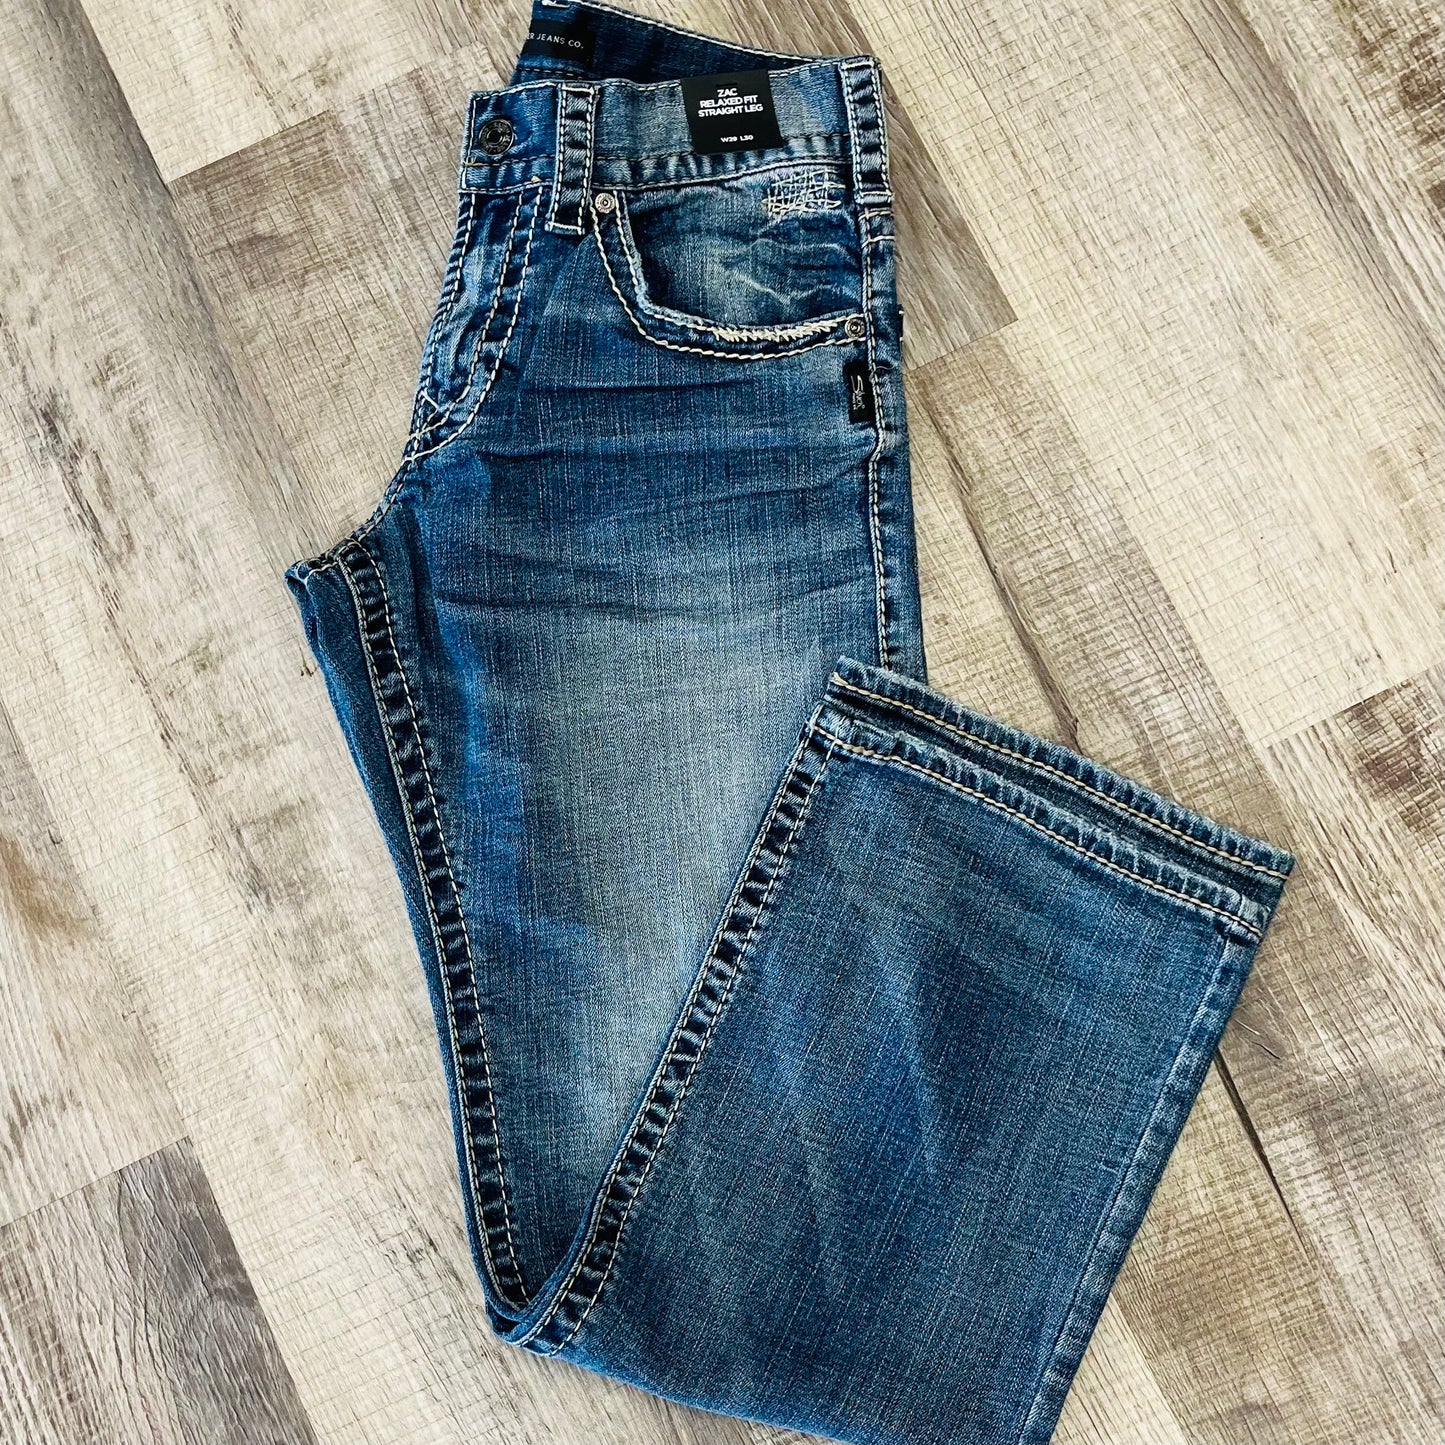 Men's Silver Jeans Relaxed Fit Jeans